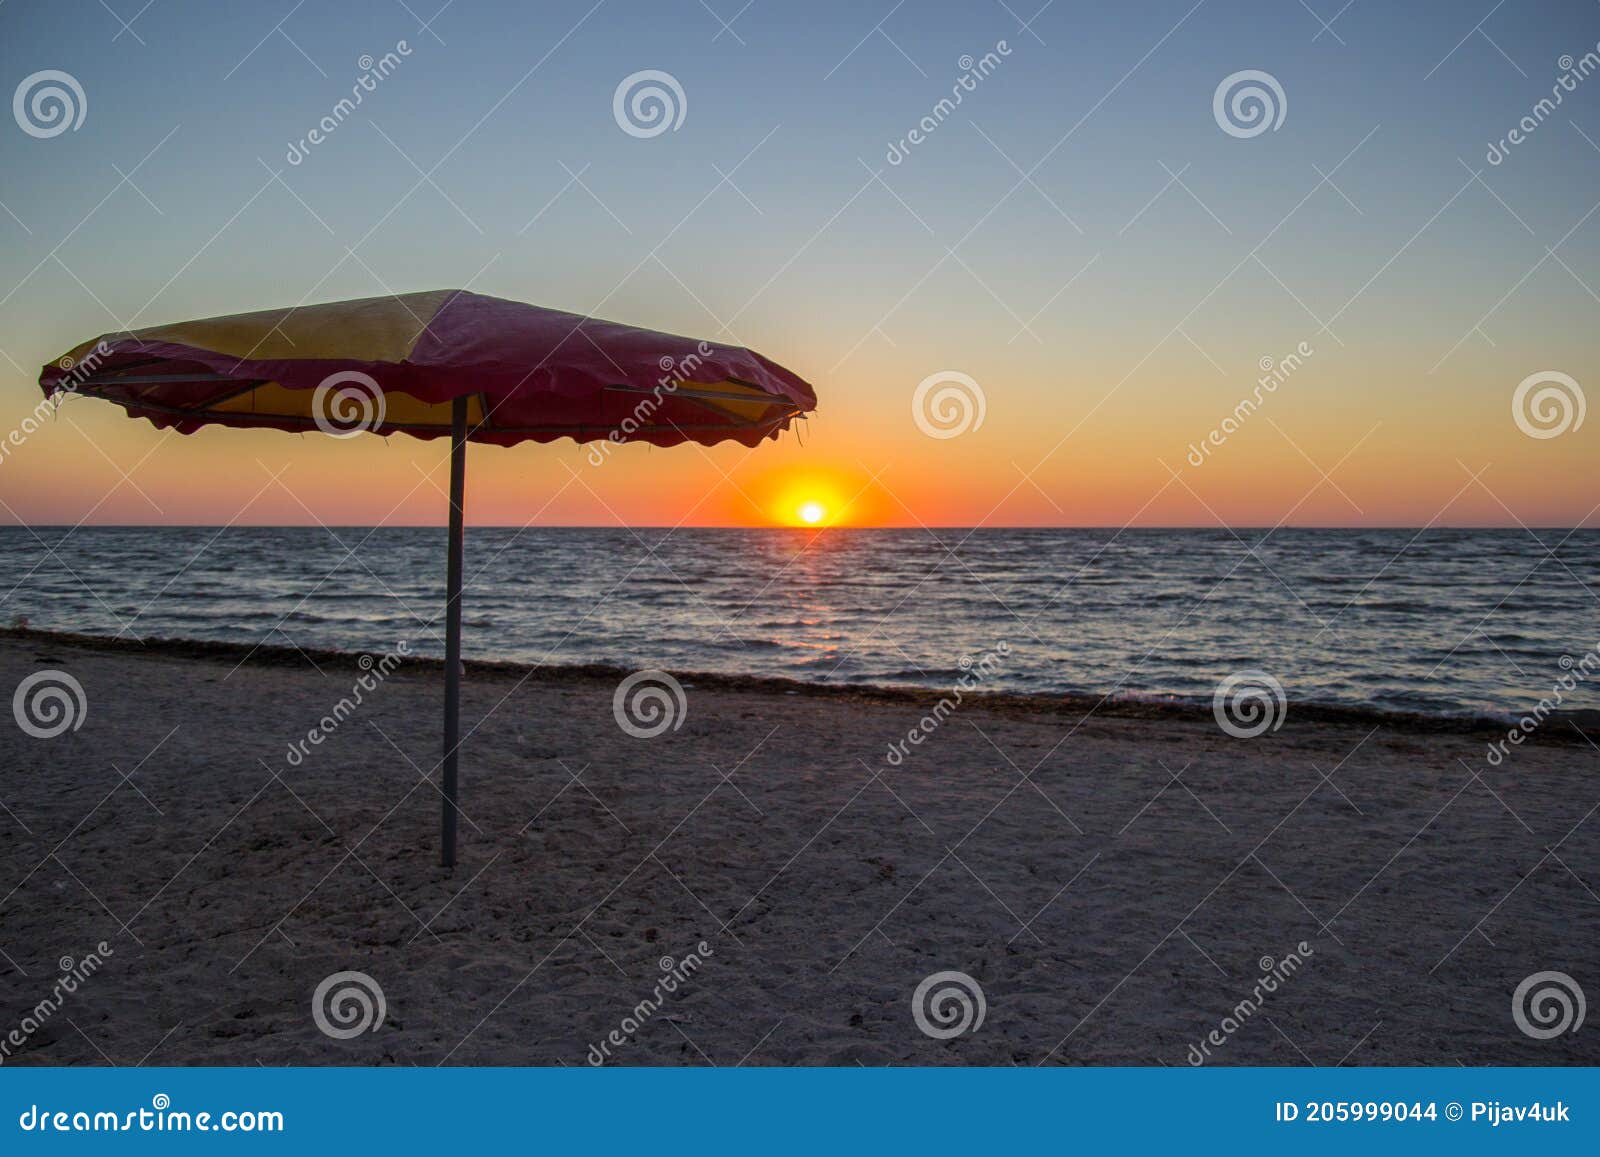 Parasol on Seaside in Sunrise with Calm Ocean Waves Stock Photo - Image ...